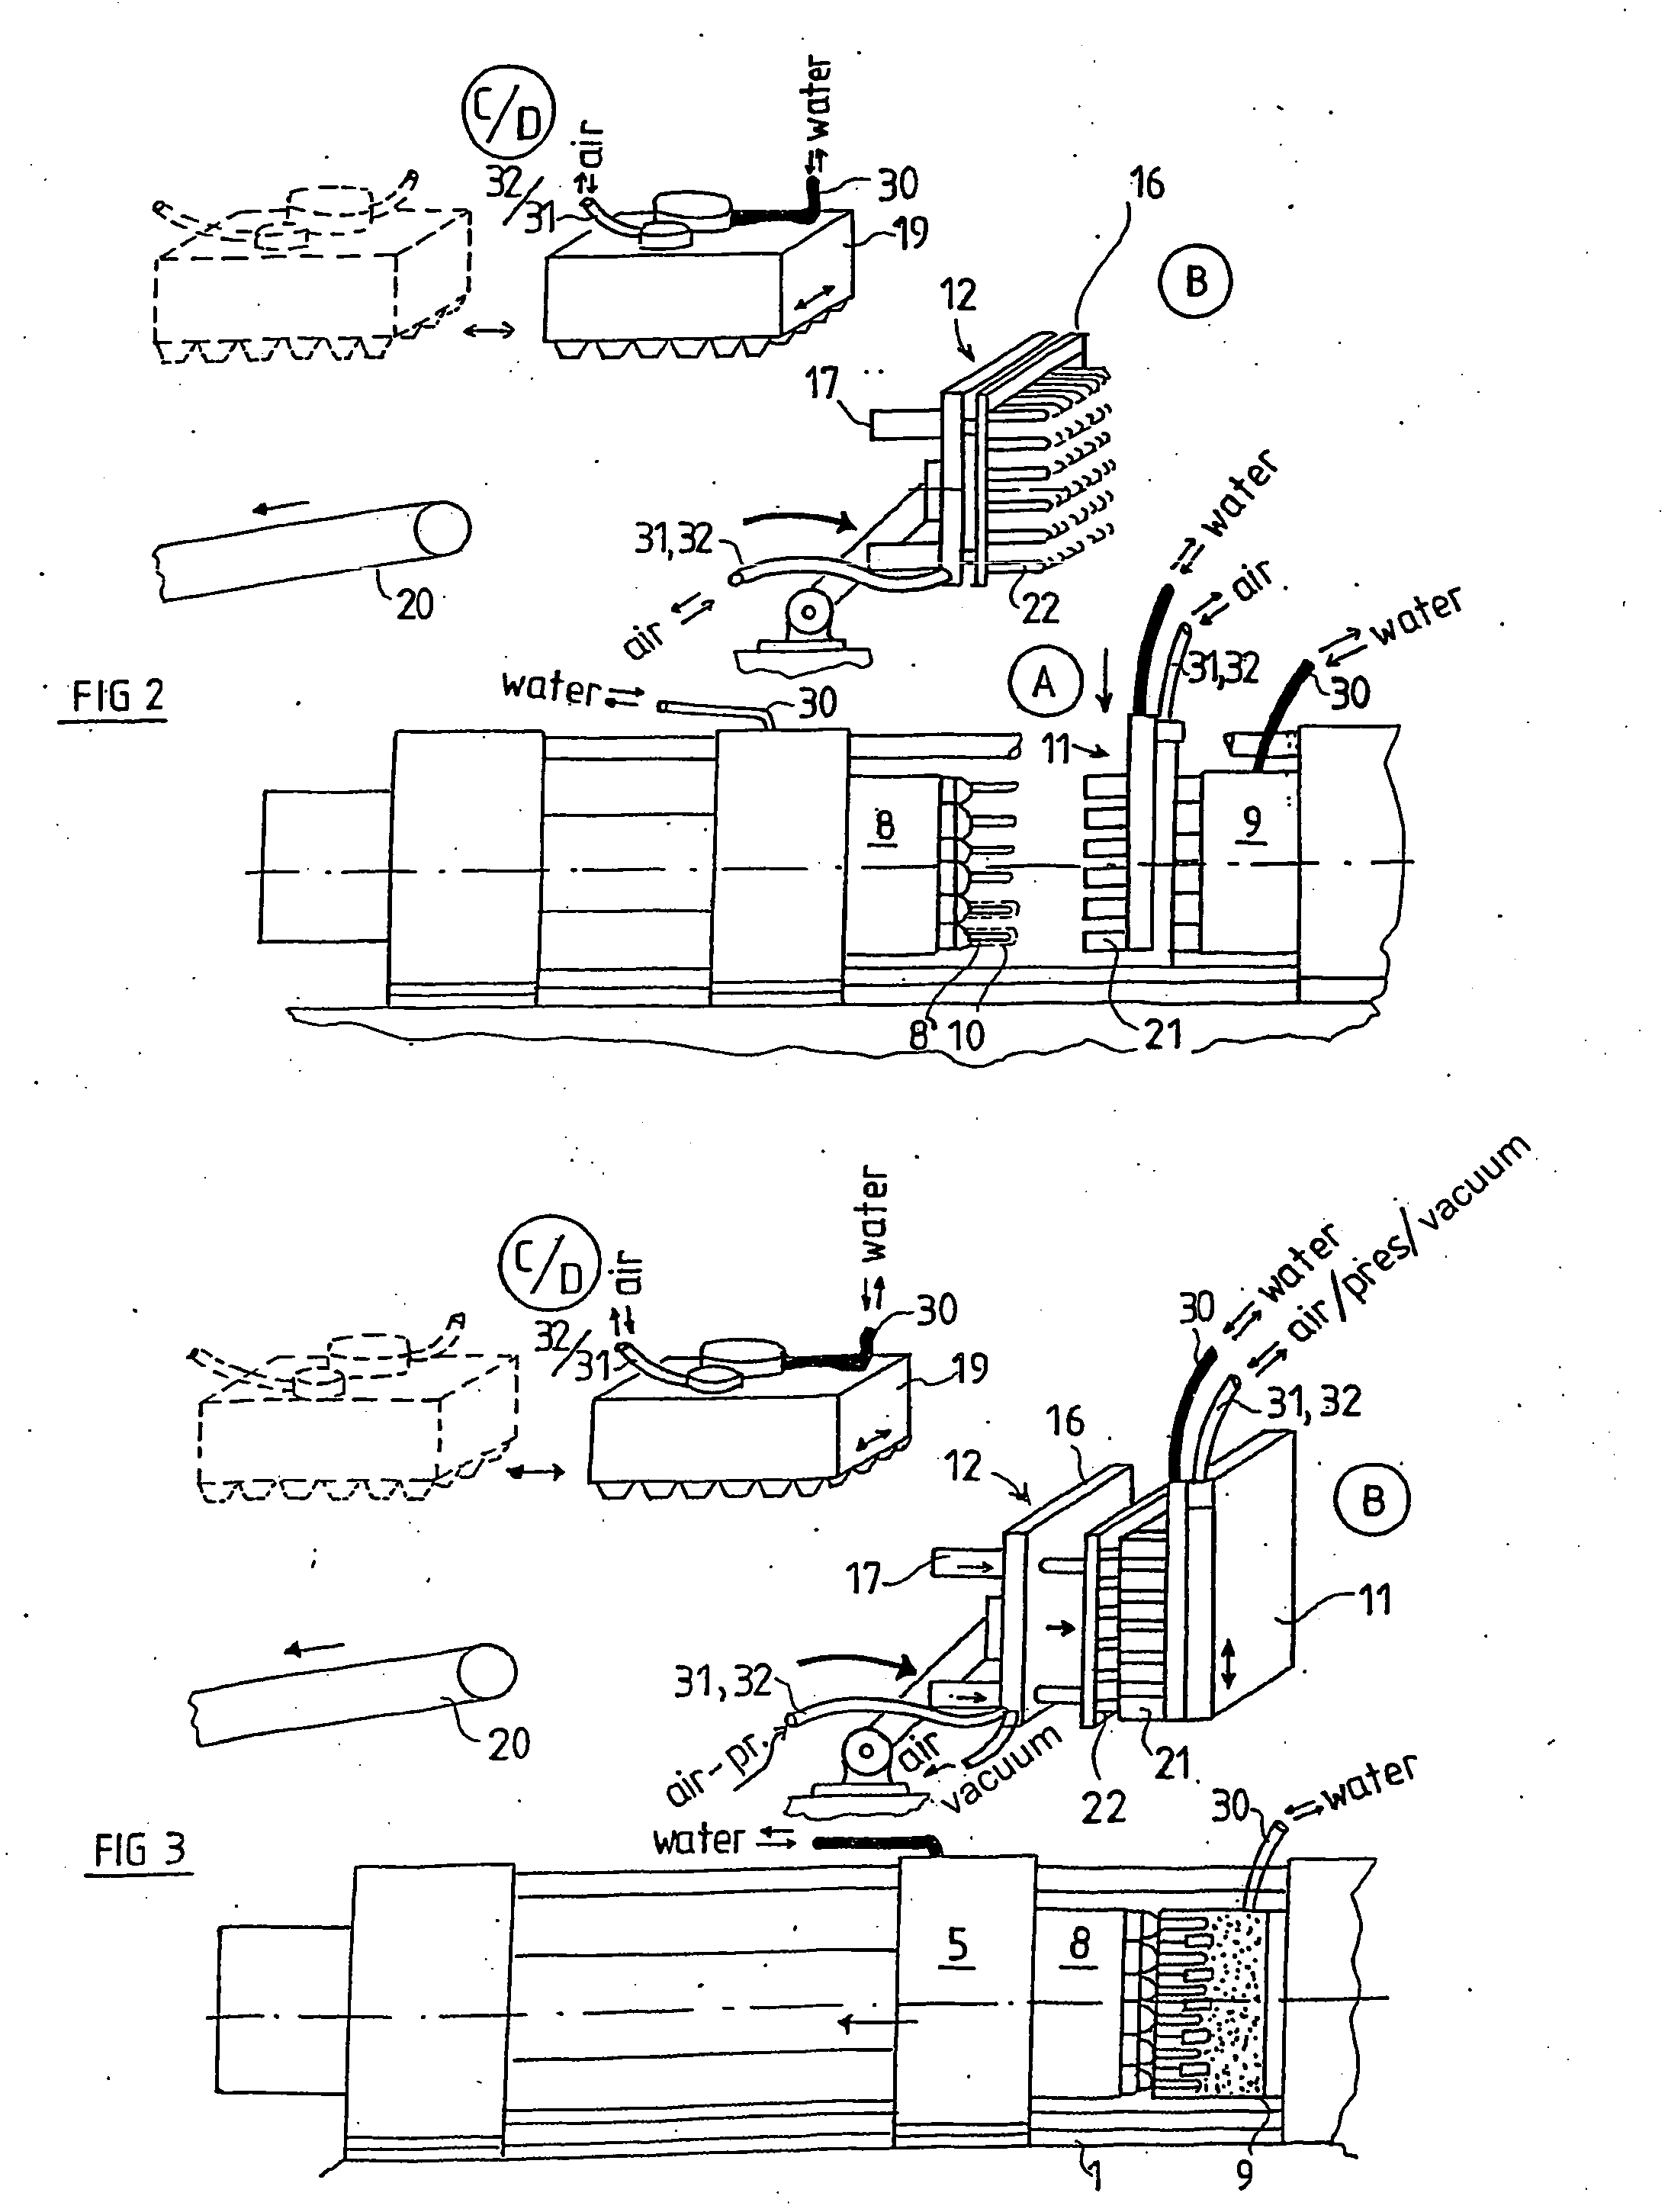 Method and device for the secondary treatment and the cooling of preforms